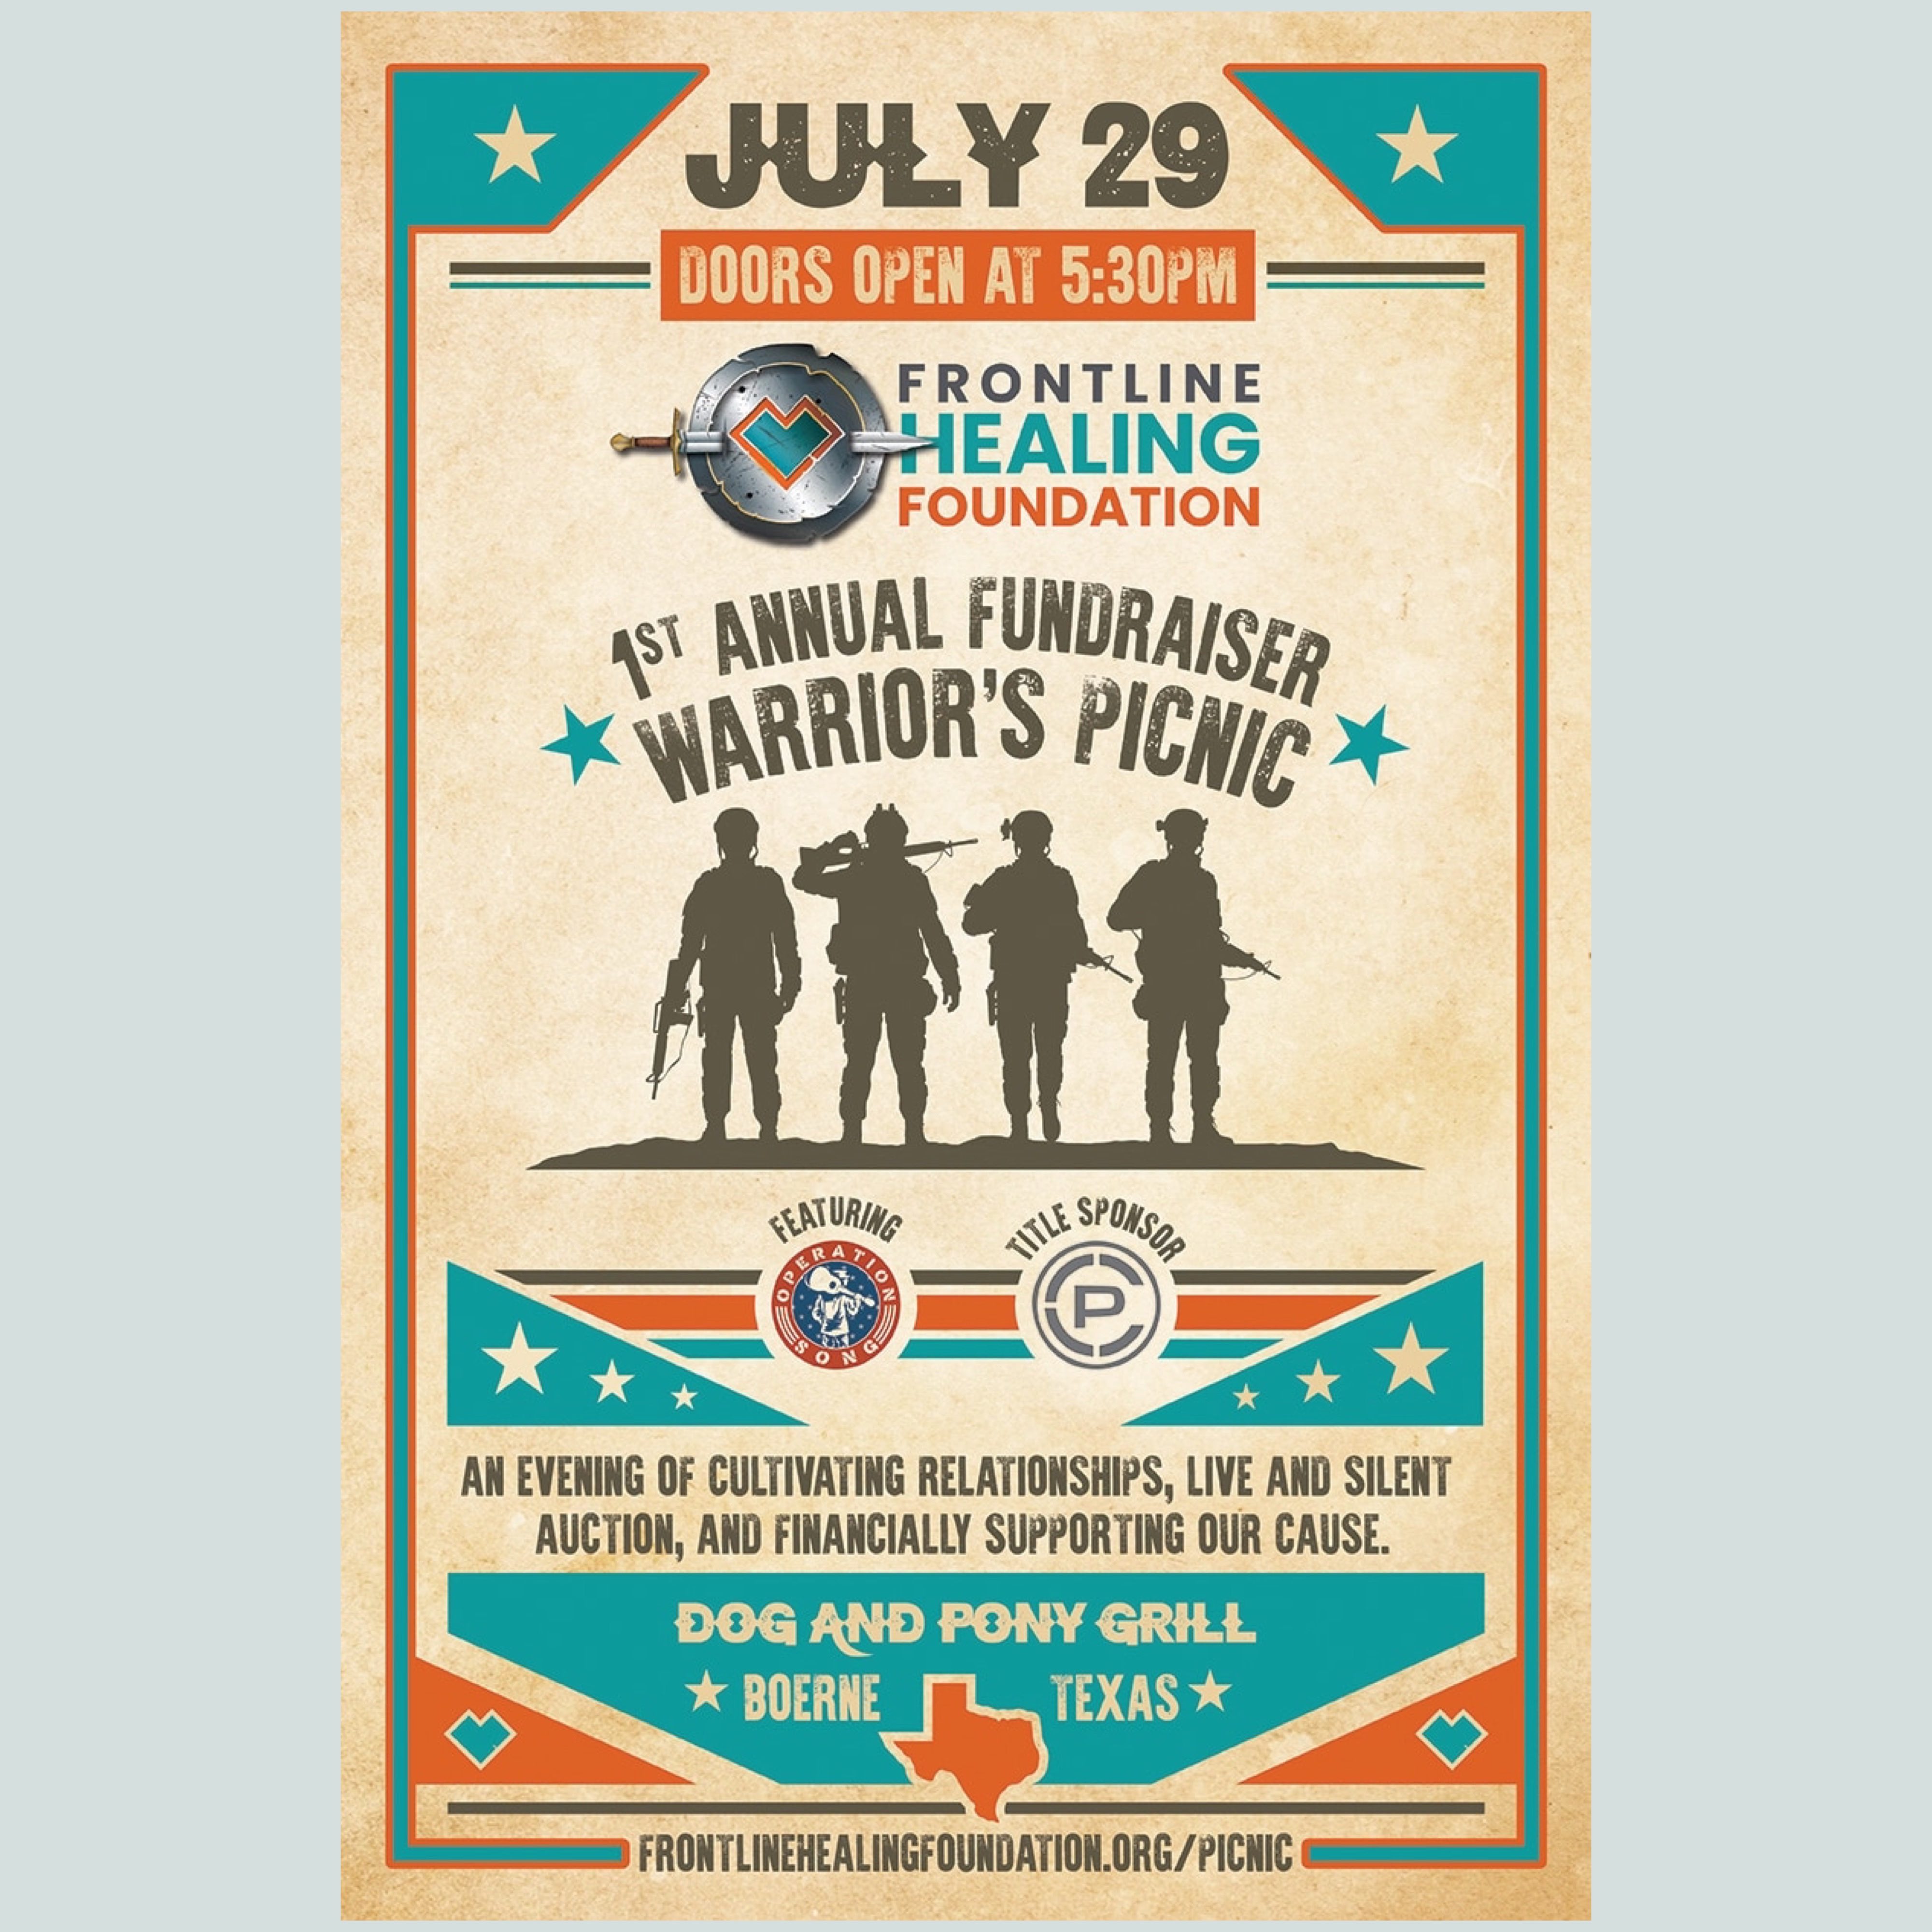 The Frontline Healing Foundation will host their First Annual Warriors Picnic Fundraiser in partnership with Operation Song on Saturday, July 29, 2023, at the Dog & Pony Grill.